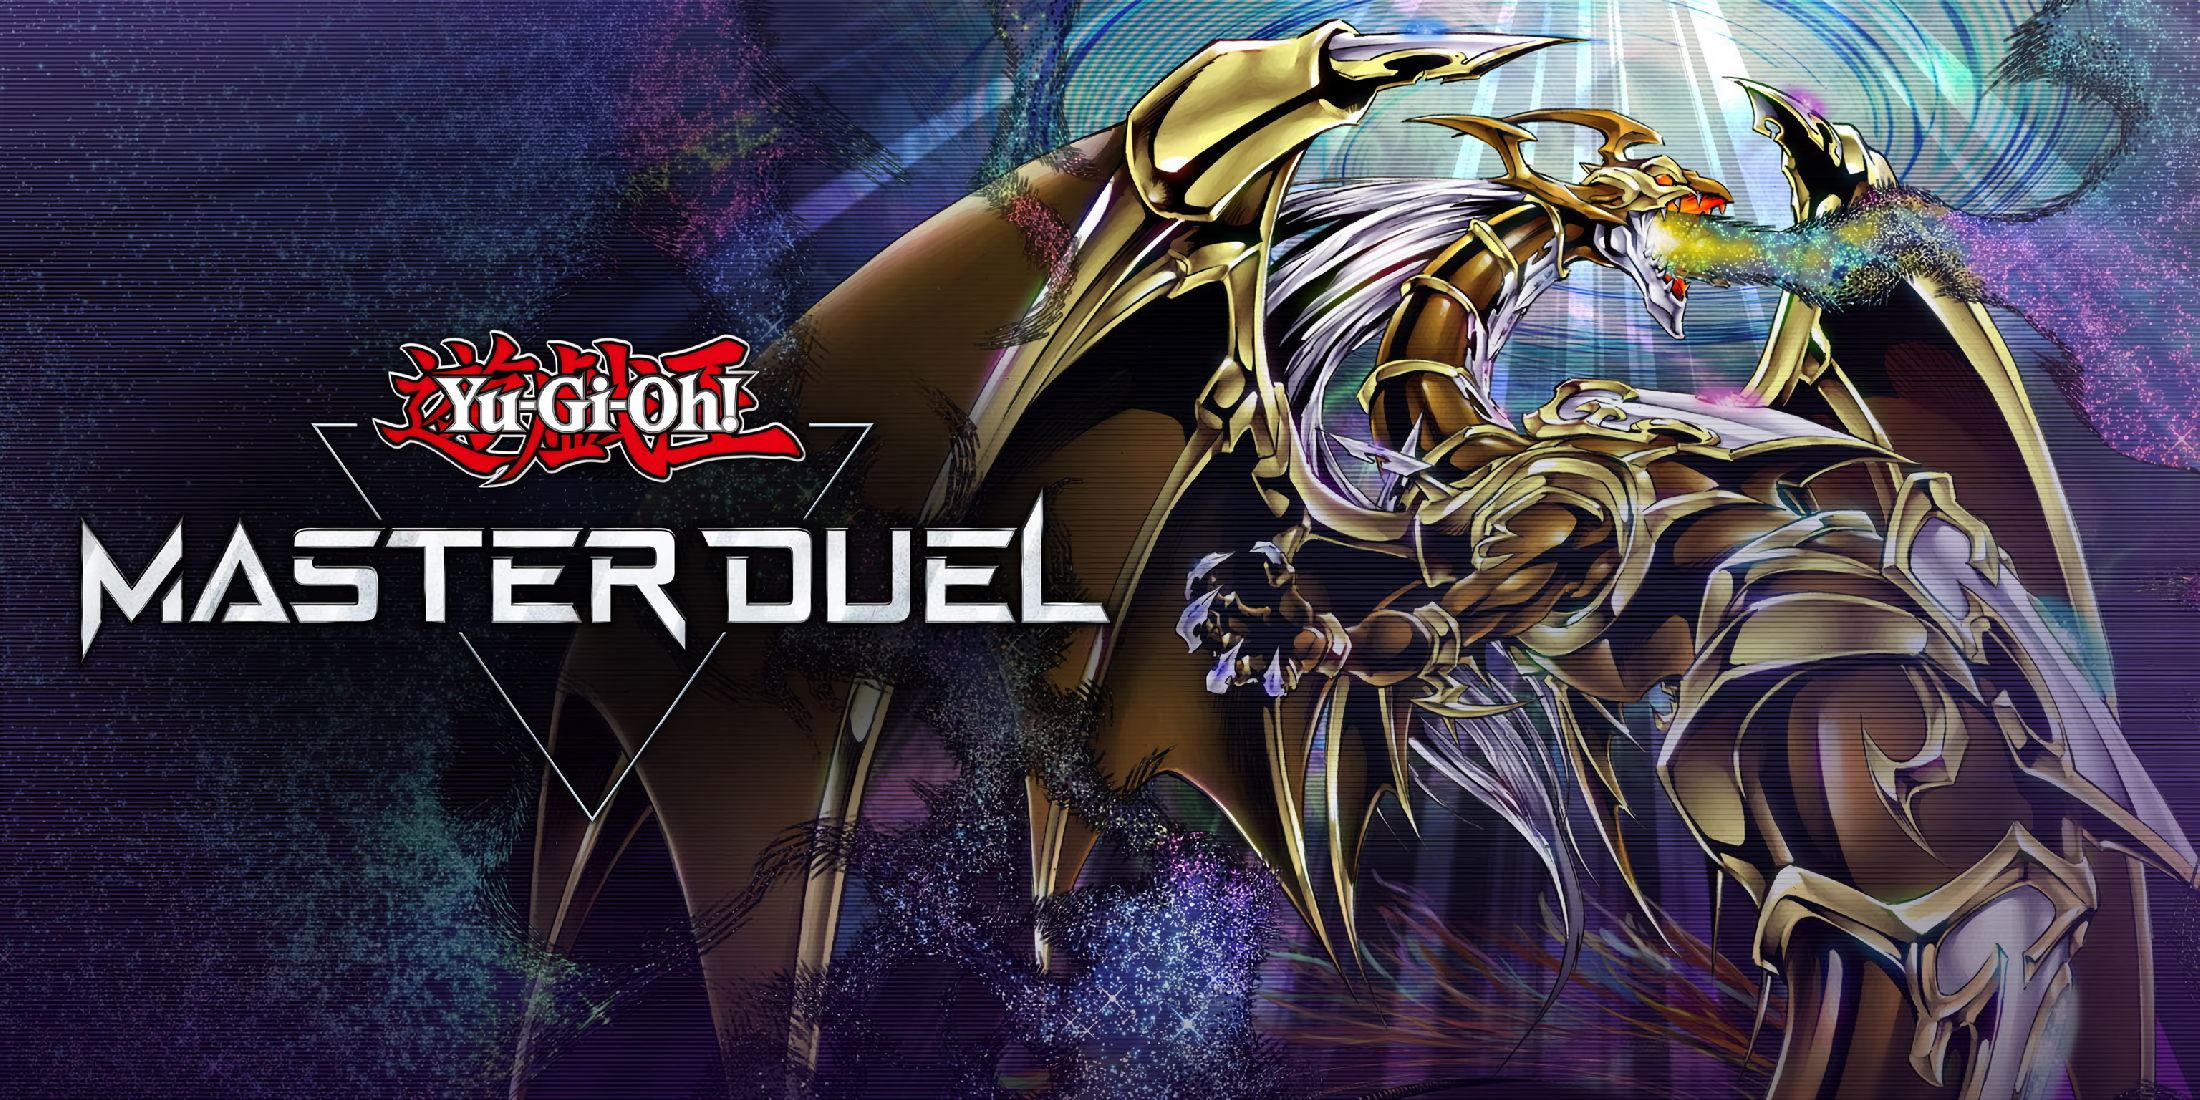 The key visual for Yu-Gi-Oh! Master Duel featuring Ten Thousand Dragon.